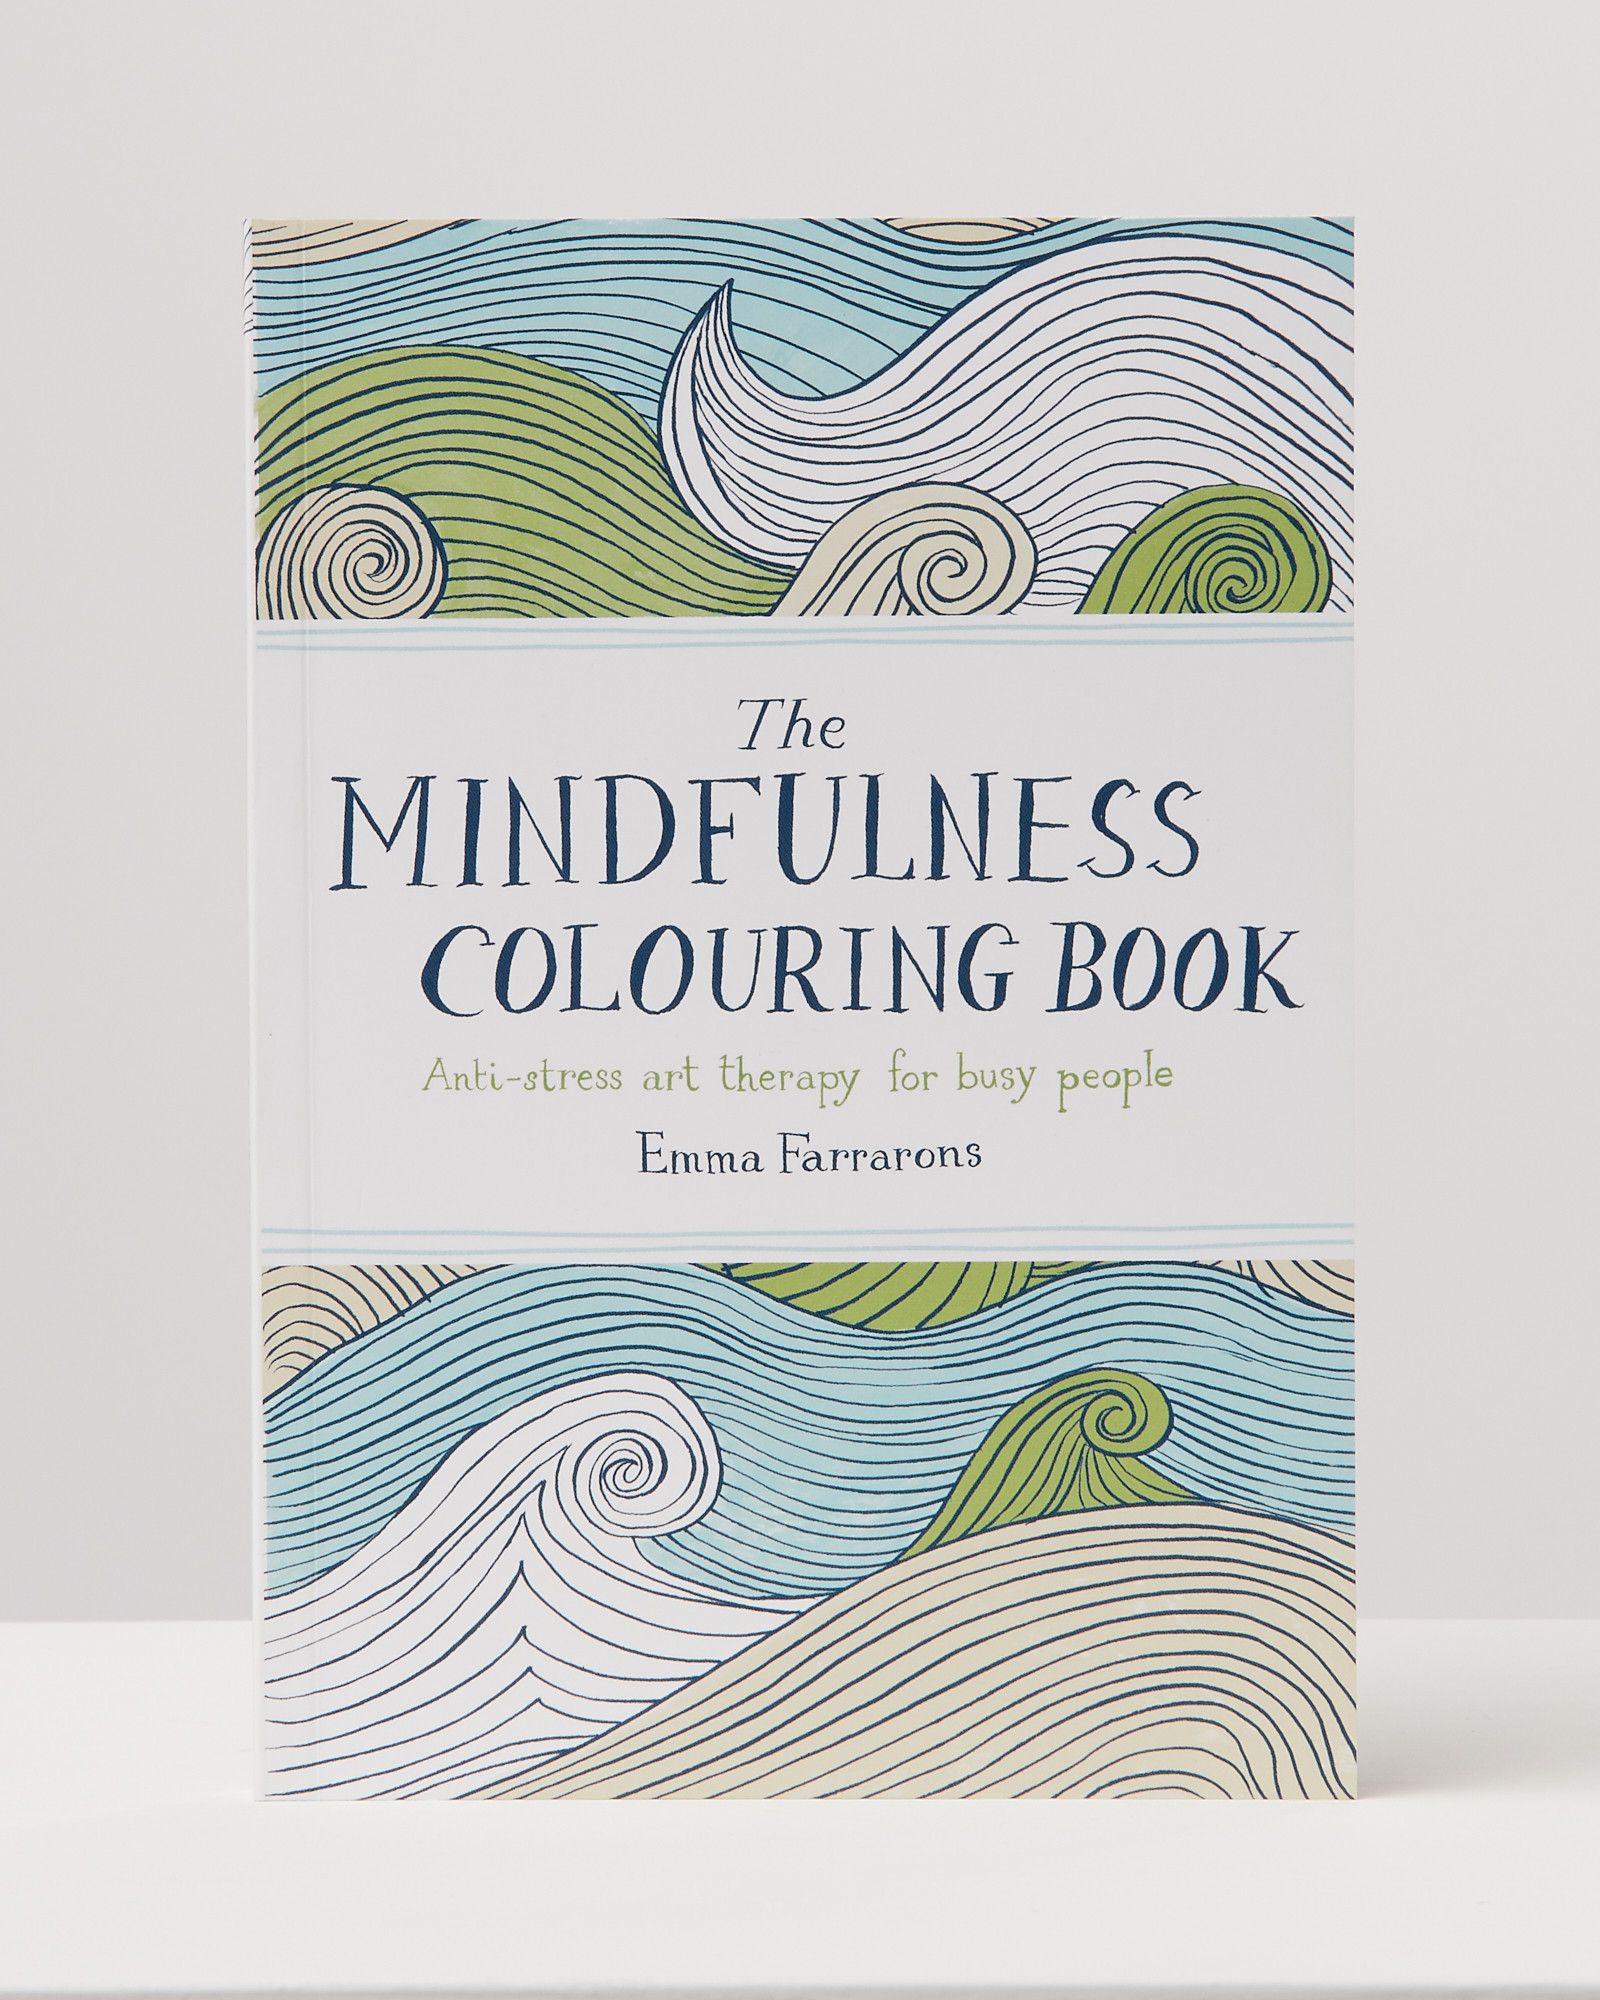 The Mindfulness Coloring Book: Anti-Stress Art Therapy for Busy People [Book]